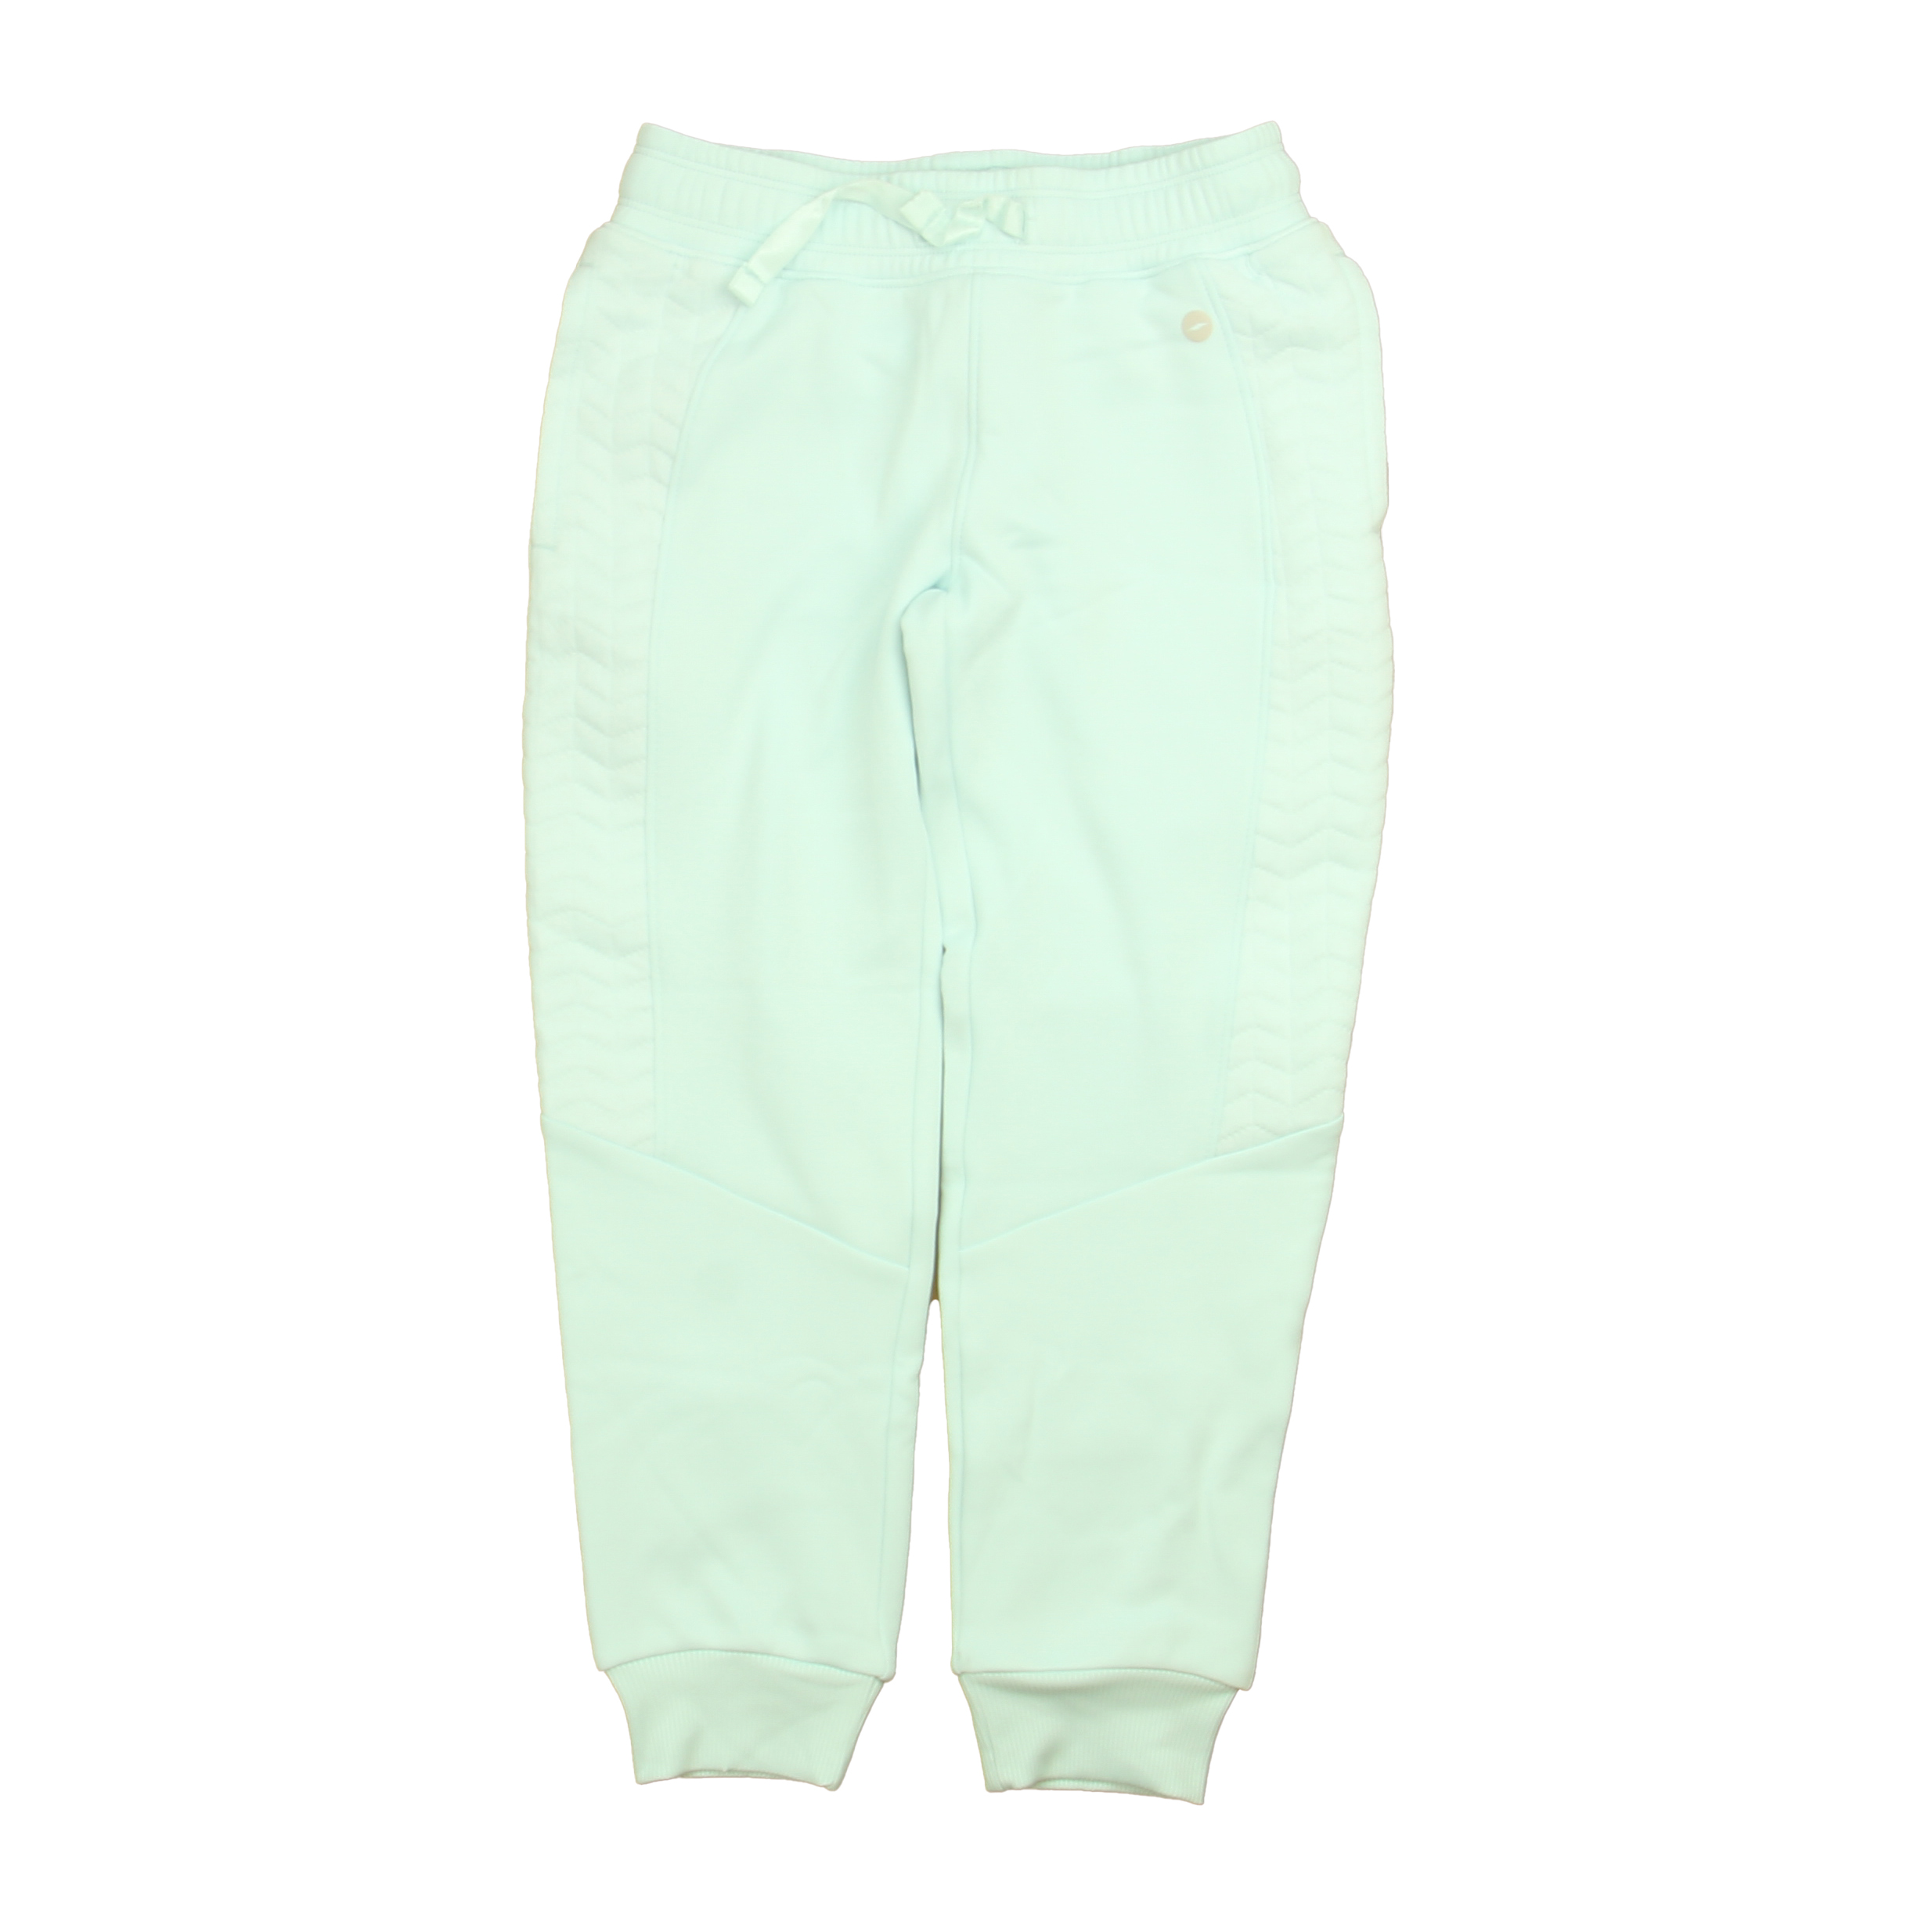 Athletic Pants size: 6 Years - The Swoondle Society